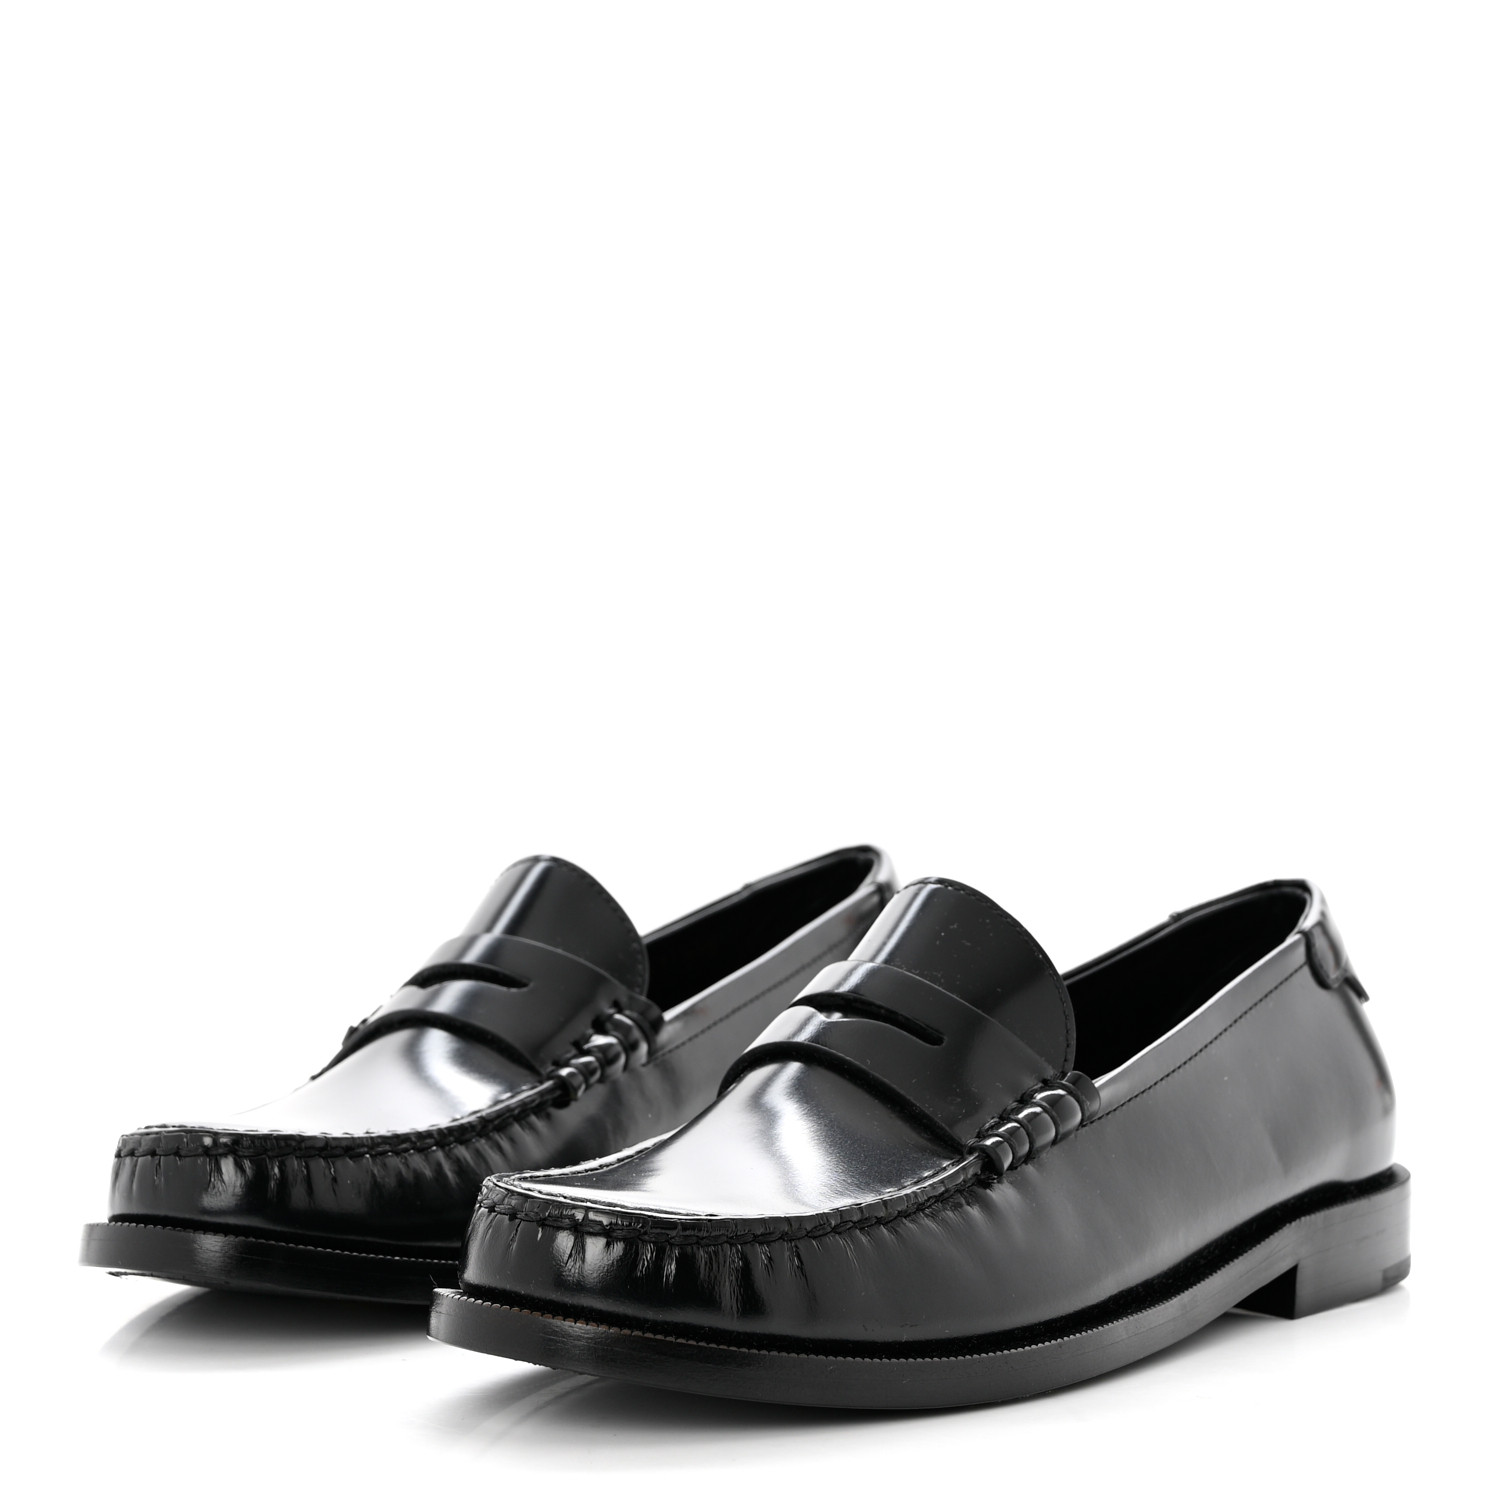 side view of SAINT LAURENT Calfskin Penny Loafers in the color Black by FASHIONPHILE